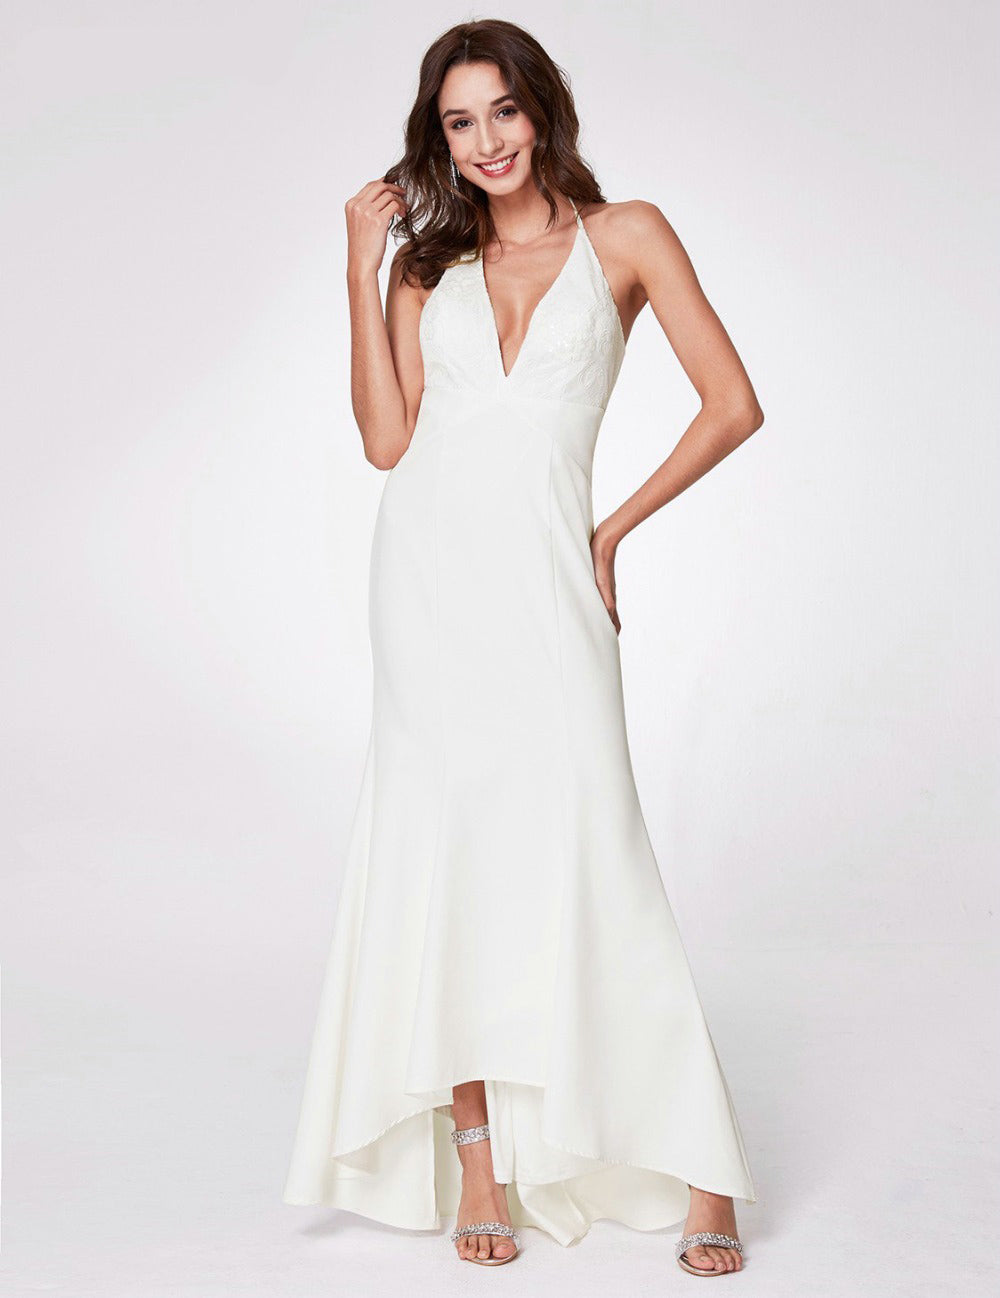 The Trina Boho Deep V Fit & Flare Beach Wedding Gown :: Available Up to Plus Size 26 W